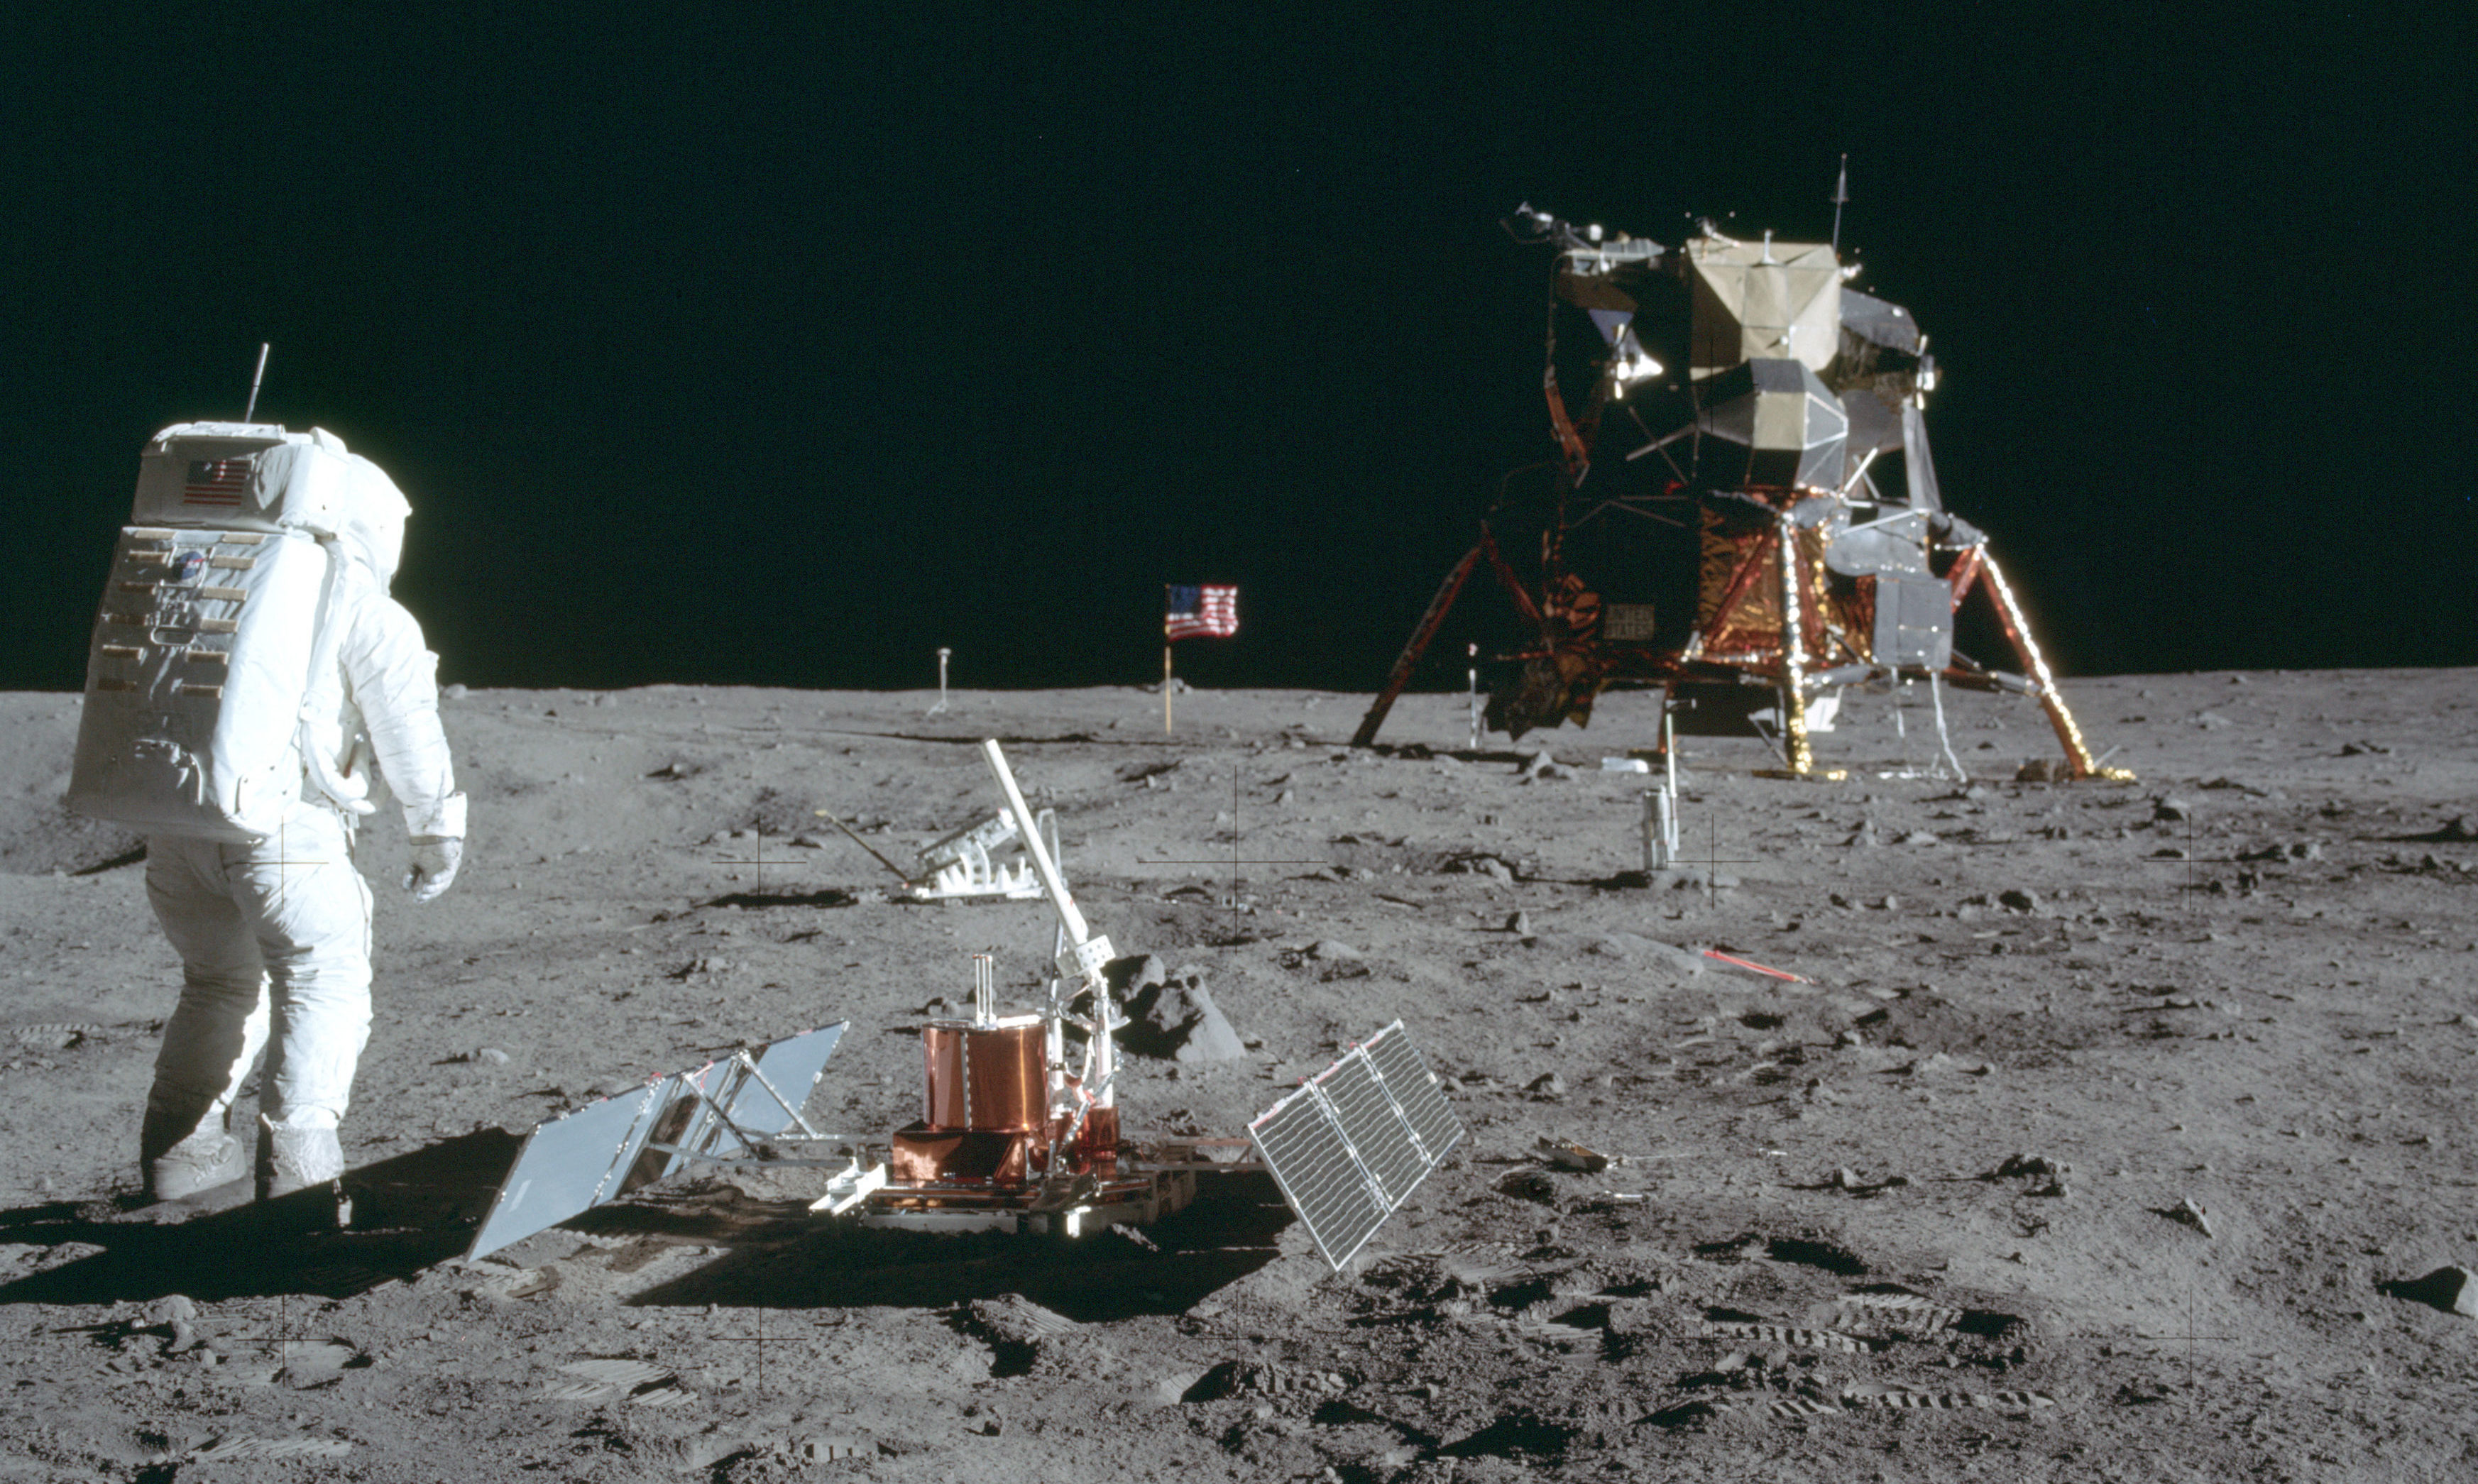 In this July 20, 1969 photo made available by NASA, astronaut Buzz Aldrin Jr. stands next to the Passive Seismic Experiment device on the surface of the the moon during the Apollo 11 mission.